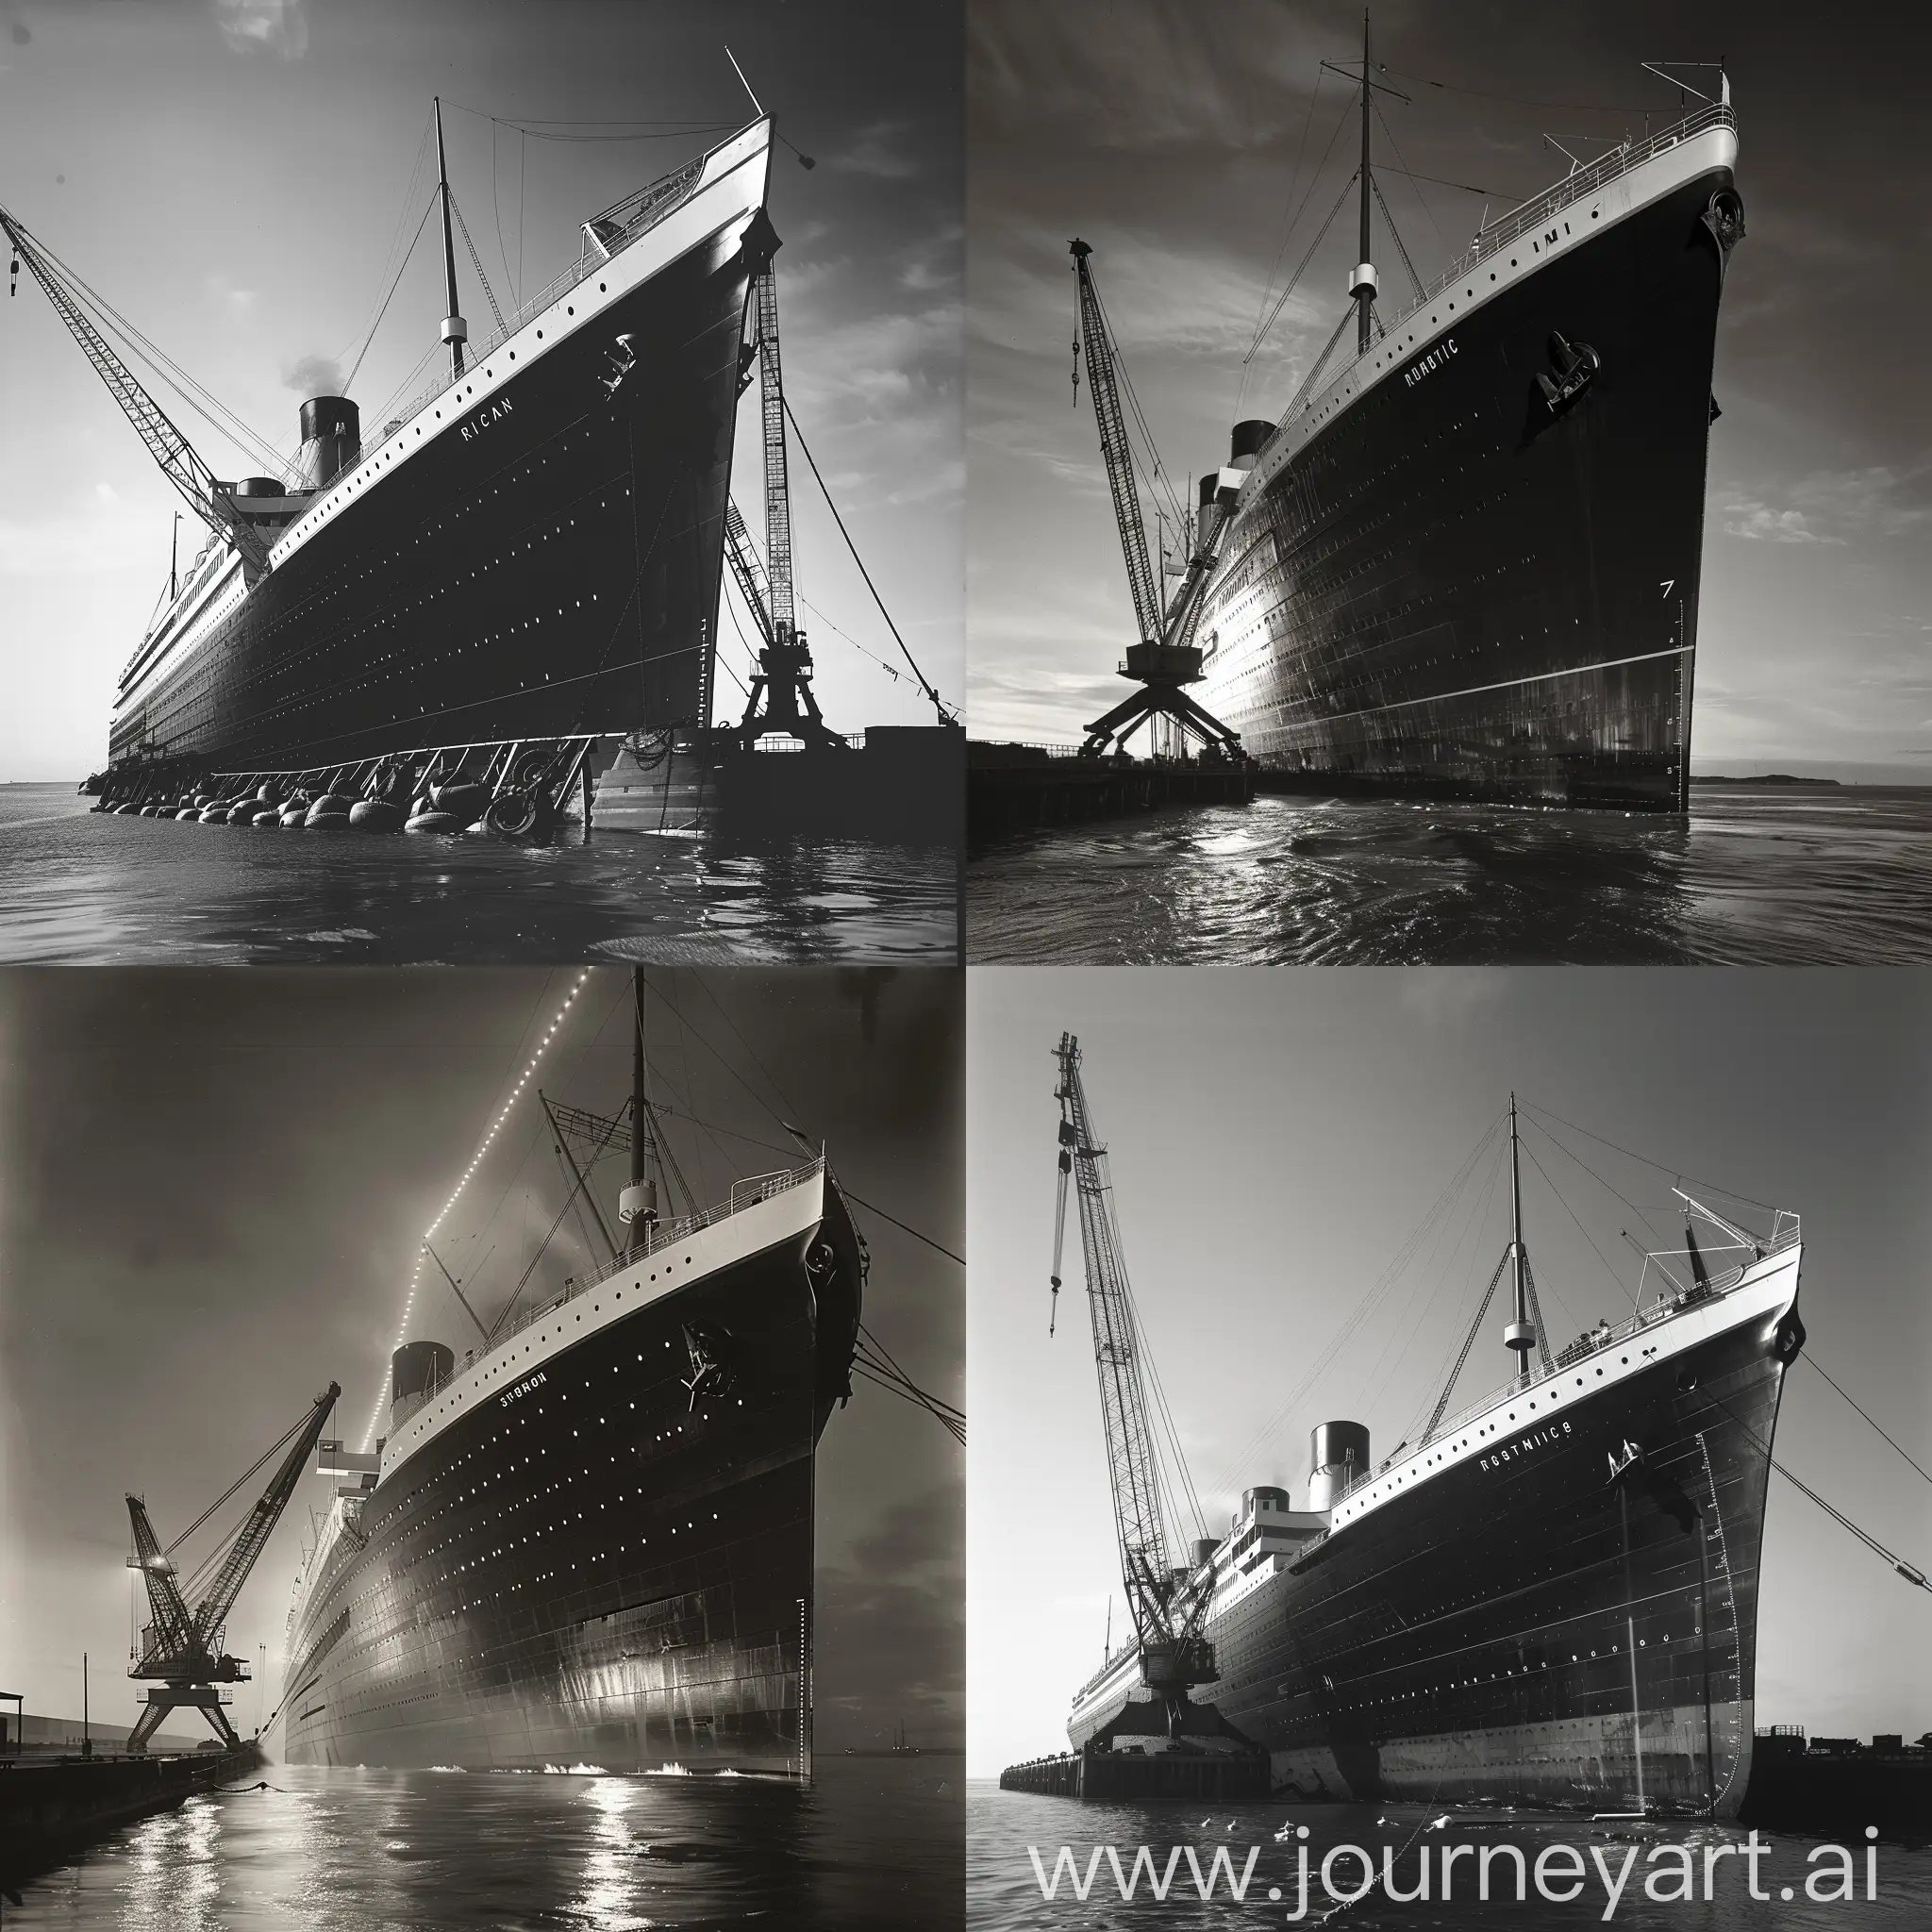 The British liner RMS Titanic, majestically towering above the open sea in a ship port, one crane beside her hull, black and white lighting, side view.